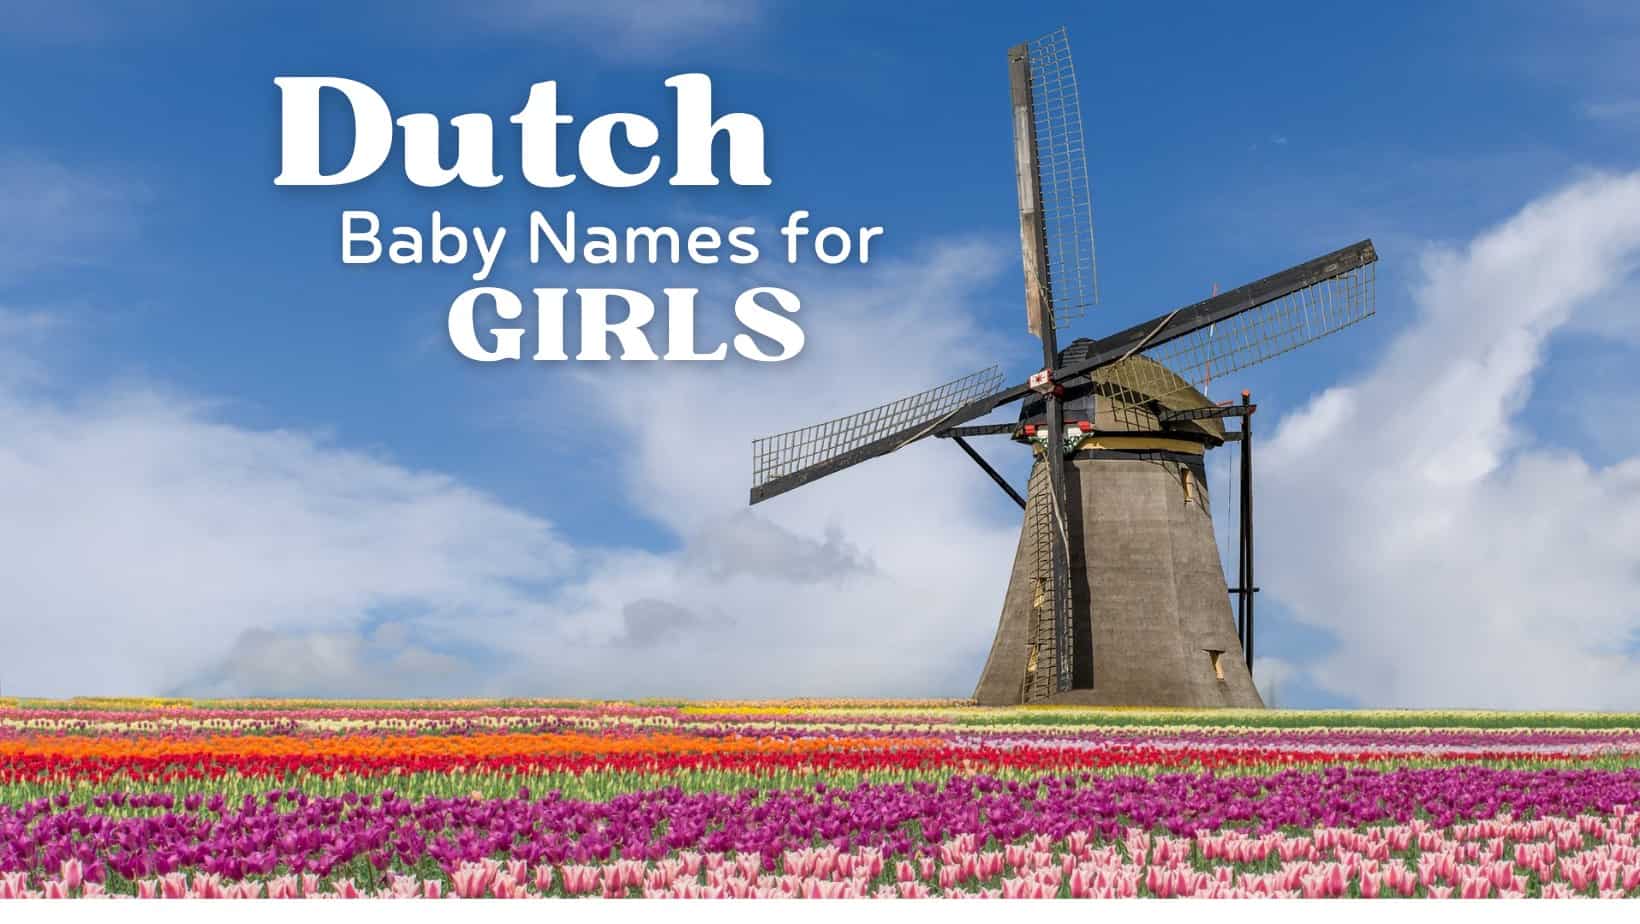 Dutch baby names for girls